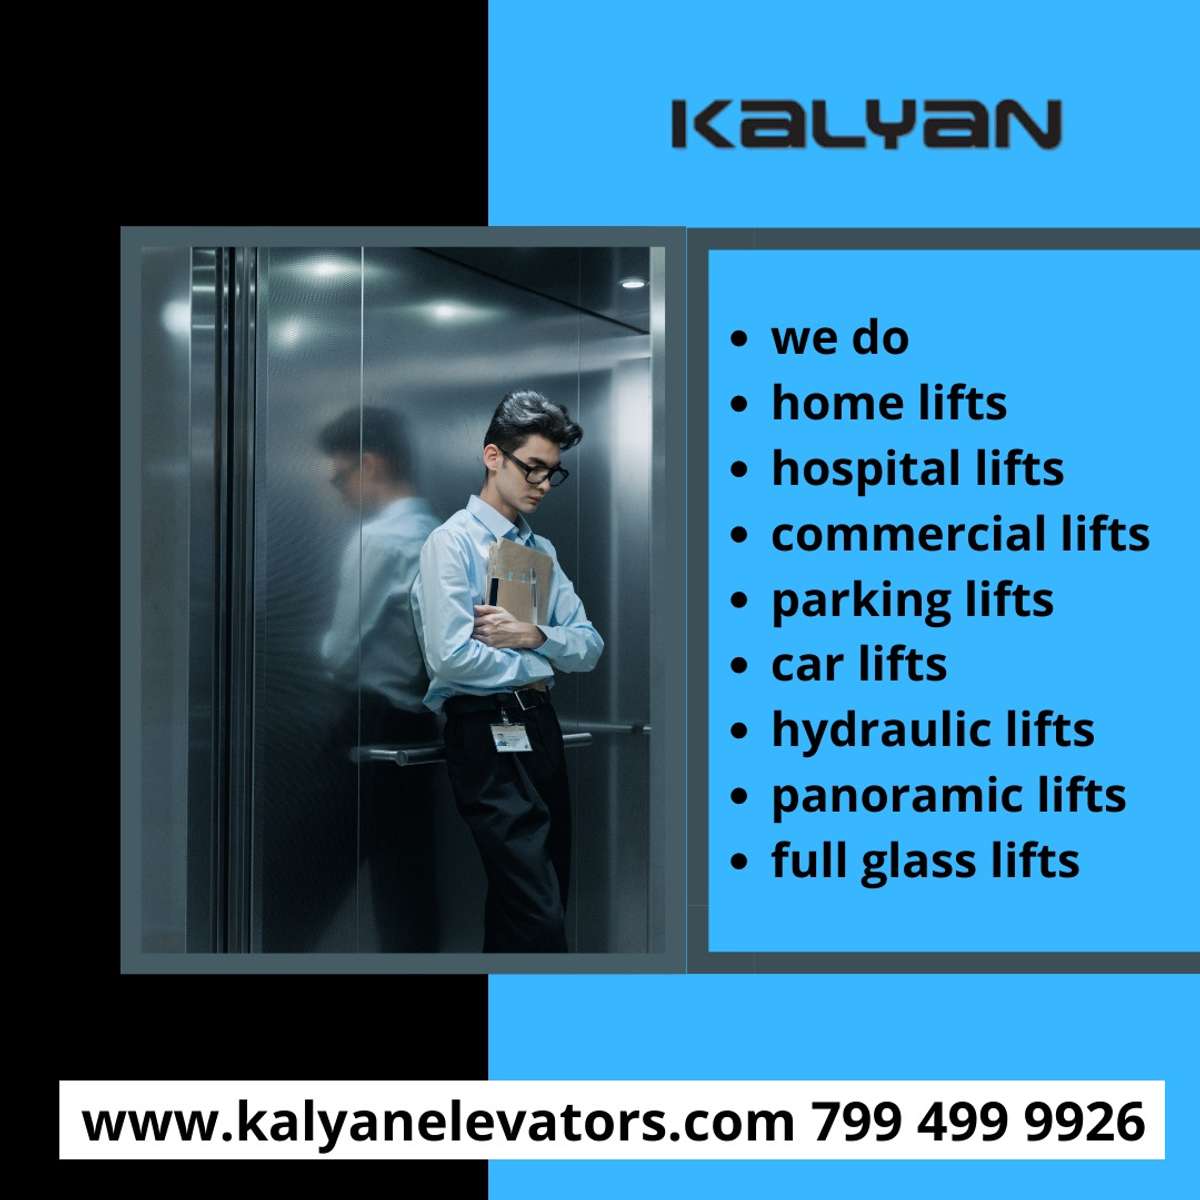 ##Kalyan Elevators offers the long-awaited solution to vertical mobility within homes at affordable prices and easy-to-use features. Our customized and aesthetically designed home lifts are easily installable in preexisting homes as well as houses under construction, and help you relieve the headache of climbing. More details:- 